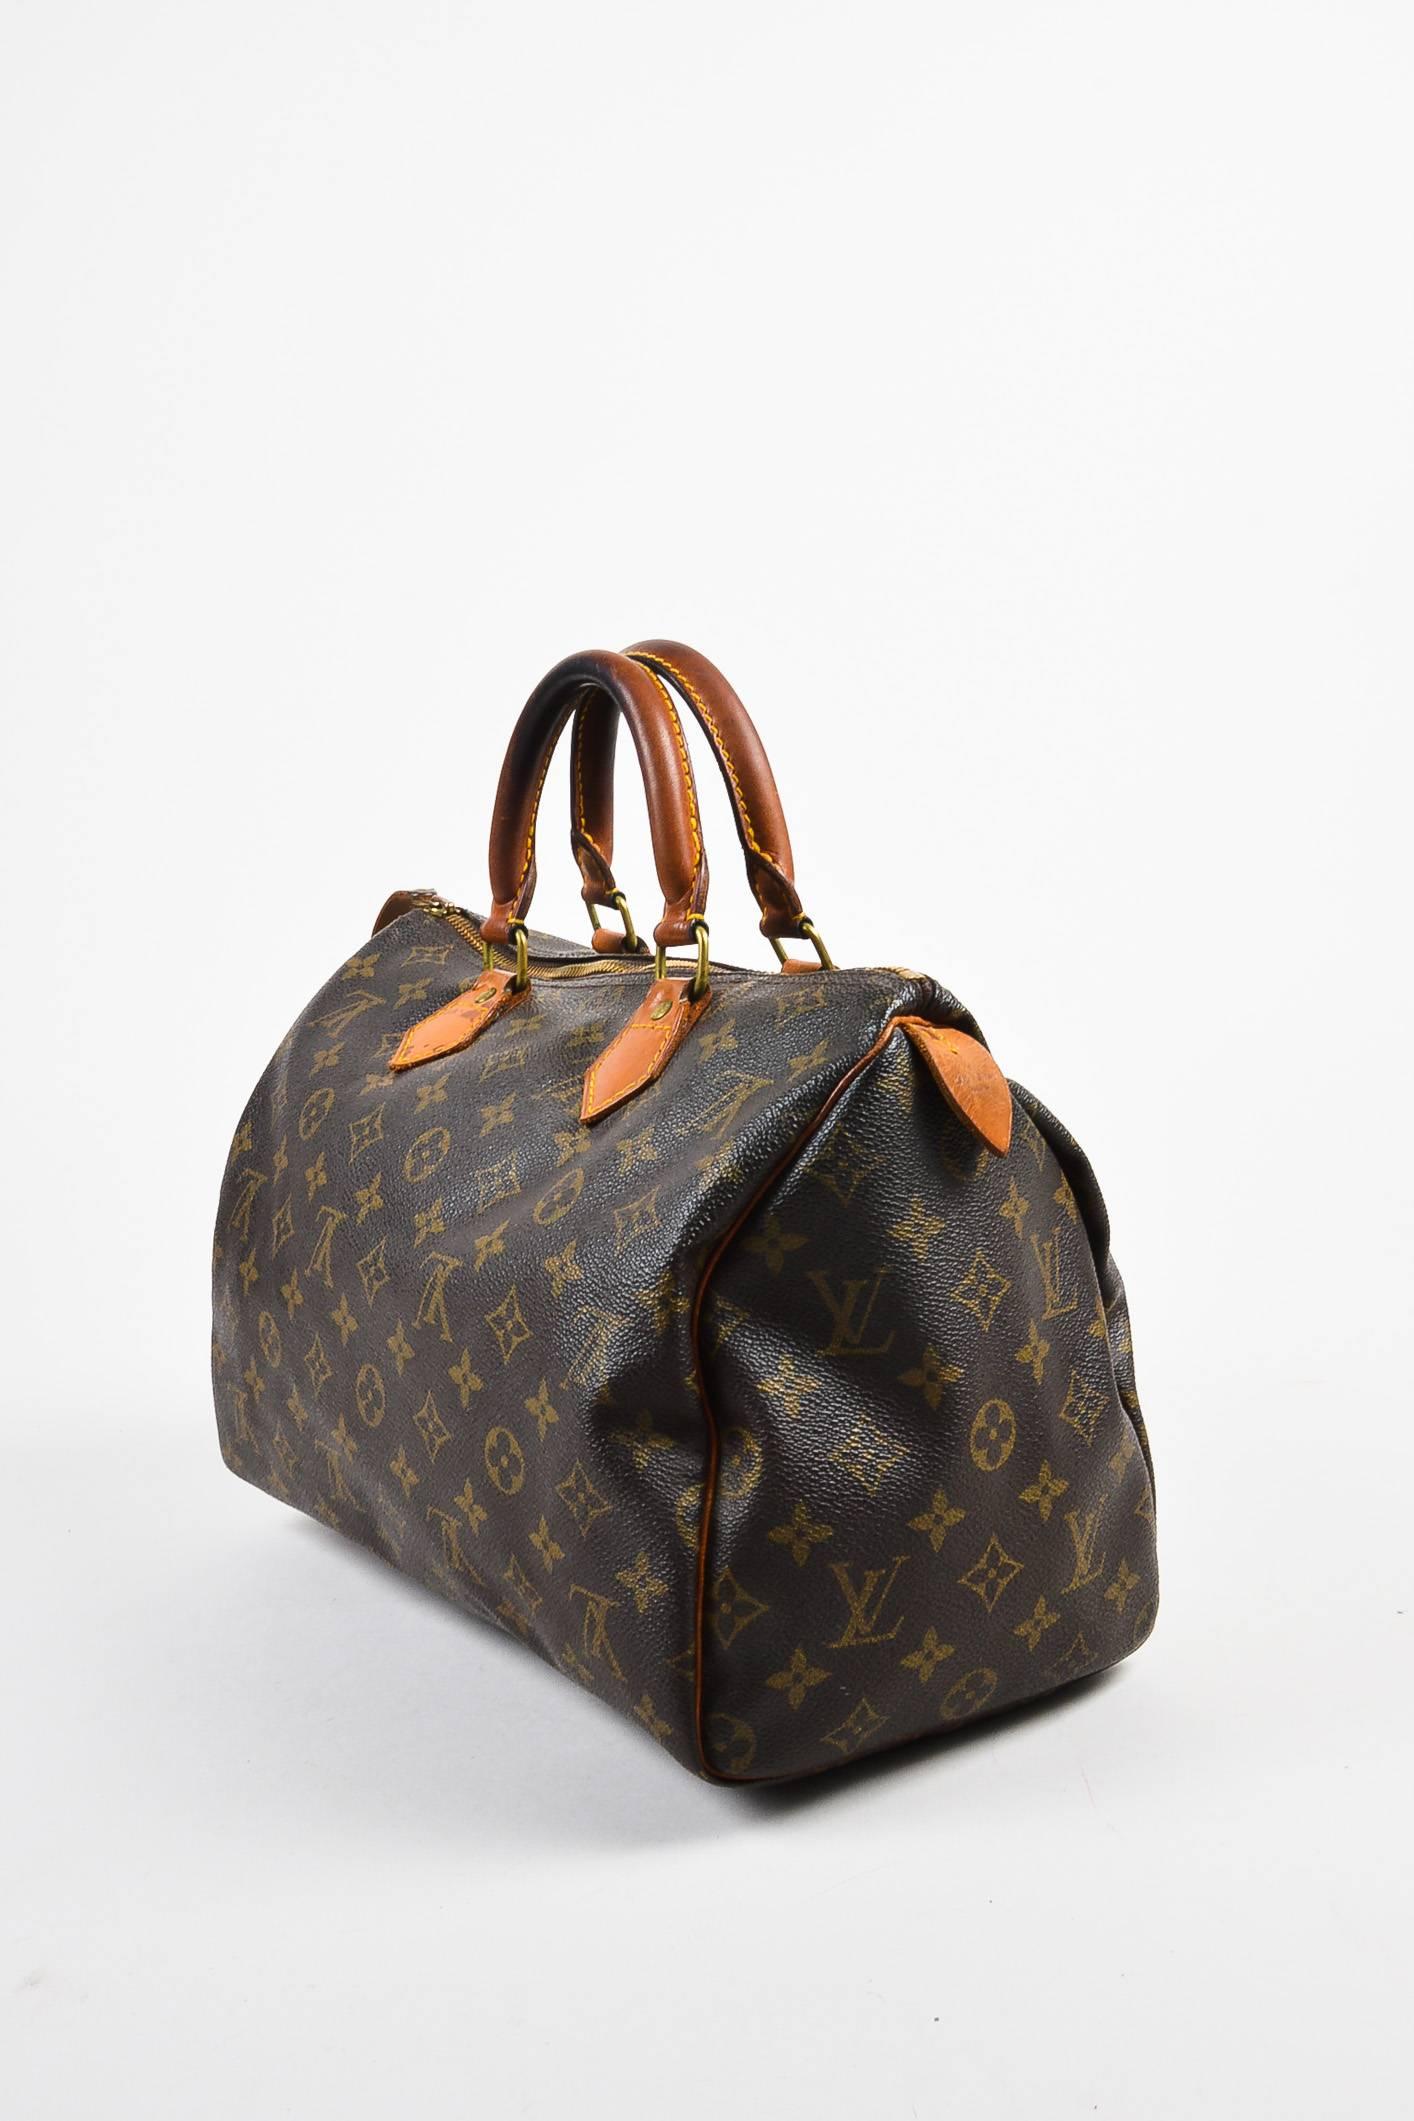 Comes in dust bag. Vintage Louis Vuitton 30cm size "Speedy" bag comes in classic monogram canvas with leather trim. Two rolled top handles. Zipper closure. Lock is attached at side but keys are not included. Date code reads,